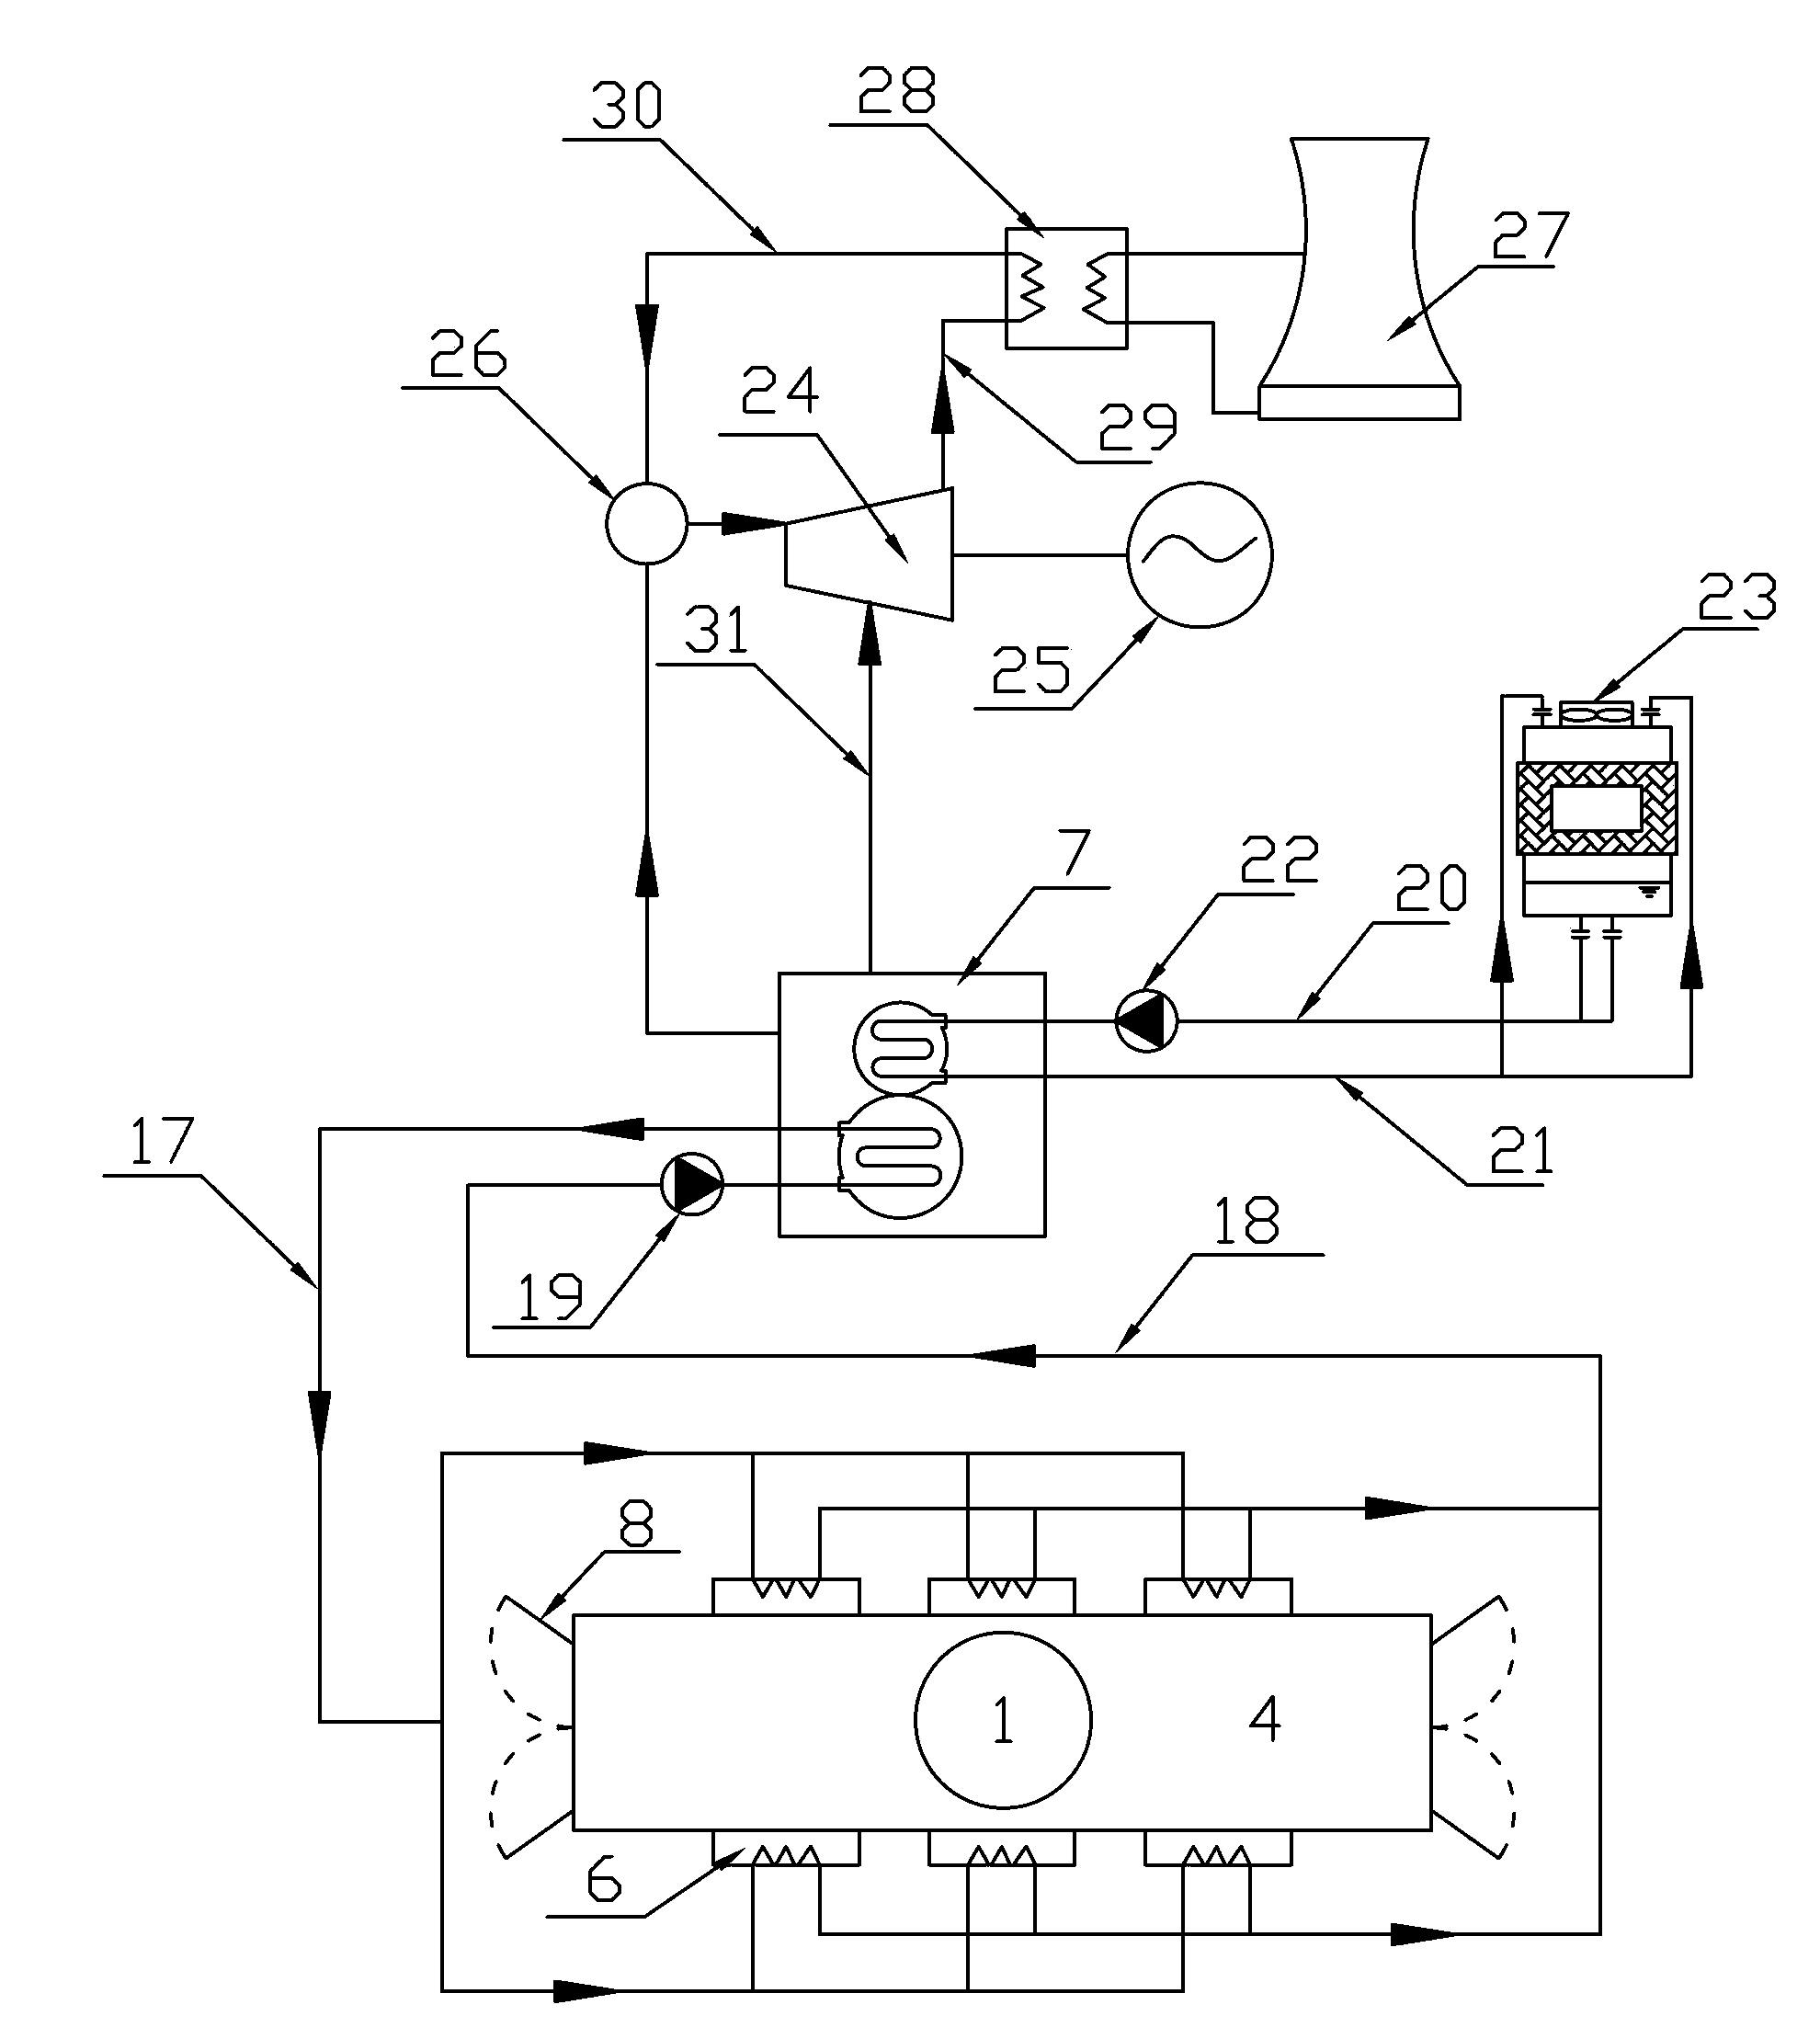 System and method by means of power plant waste heat for conducting aeration cooling on mine